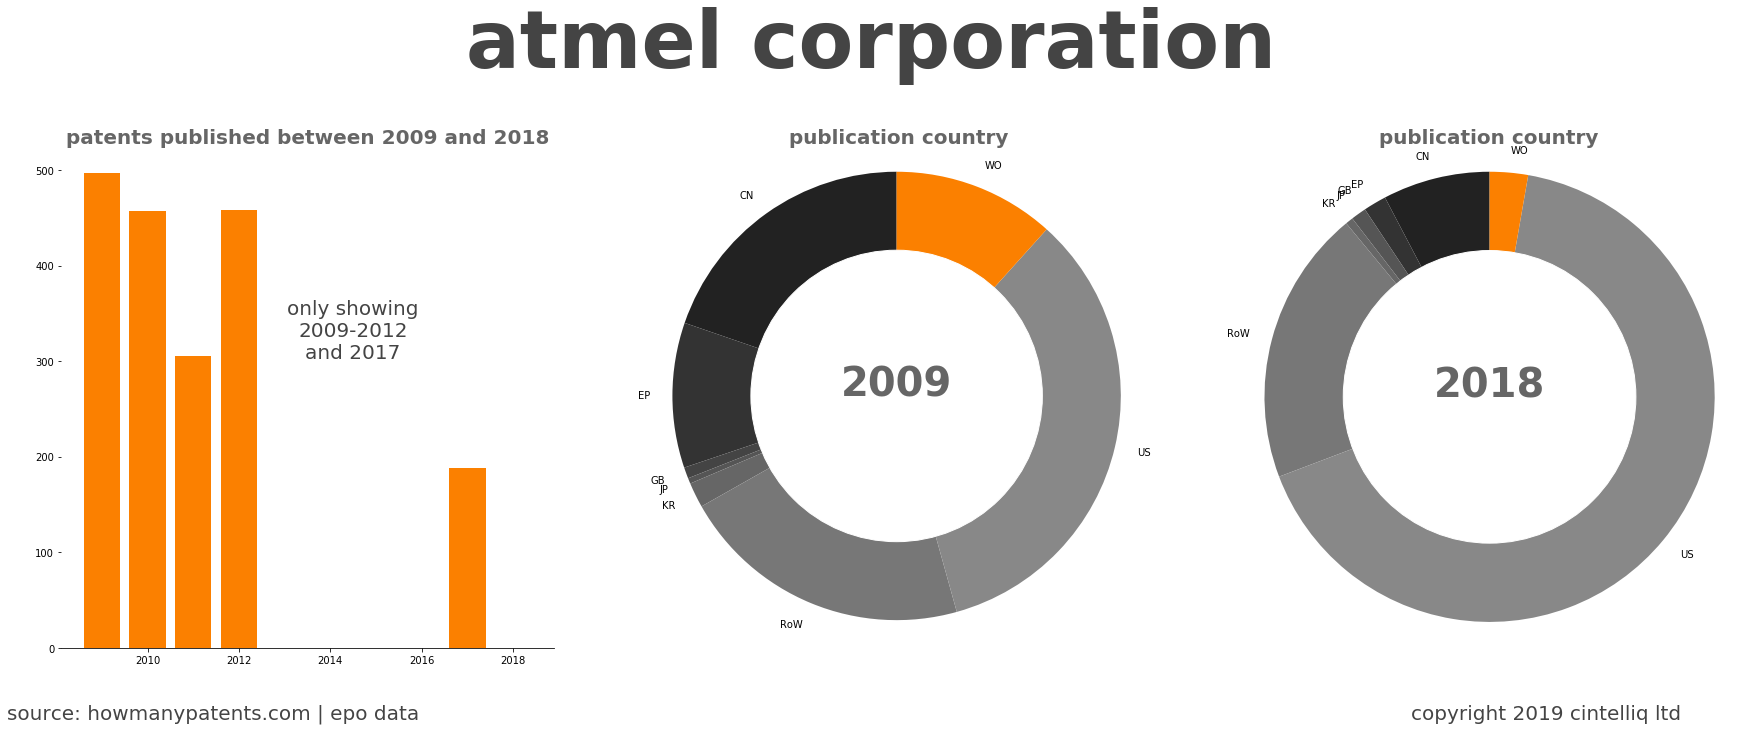 summary of patents for Atmel Corporation